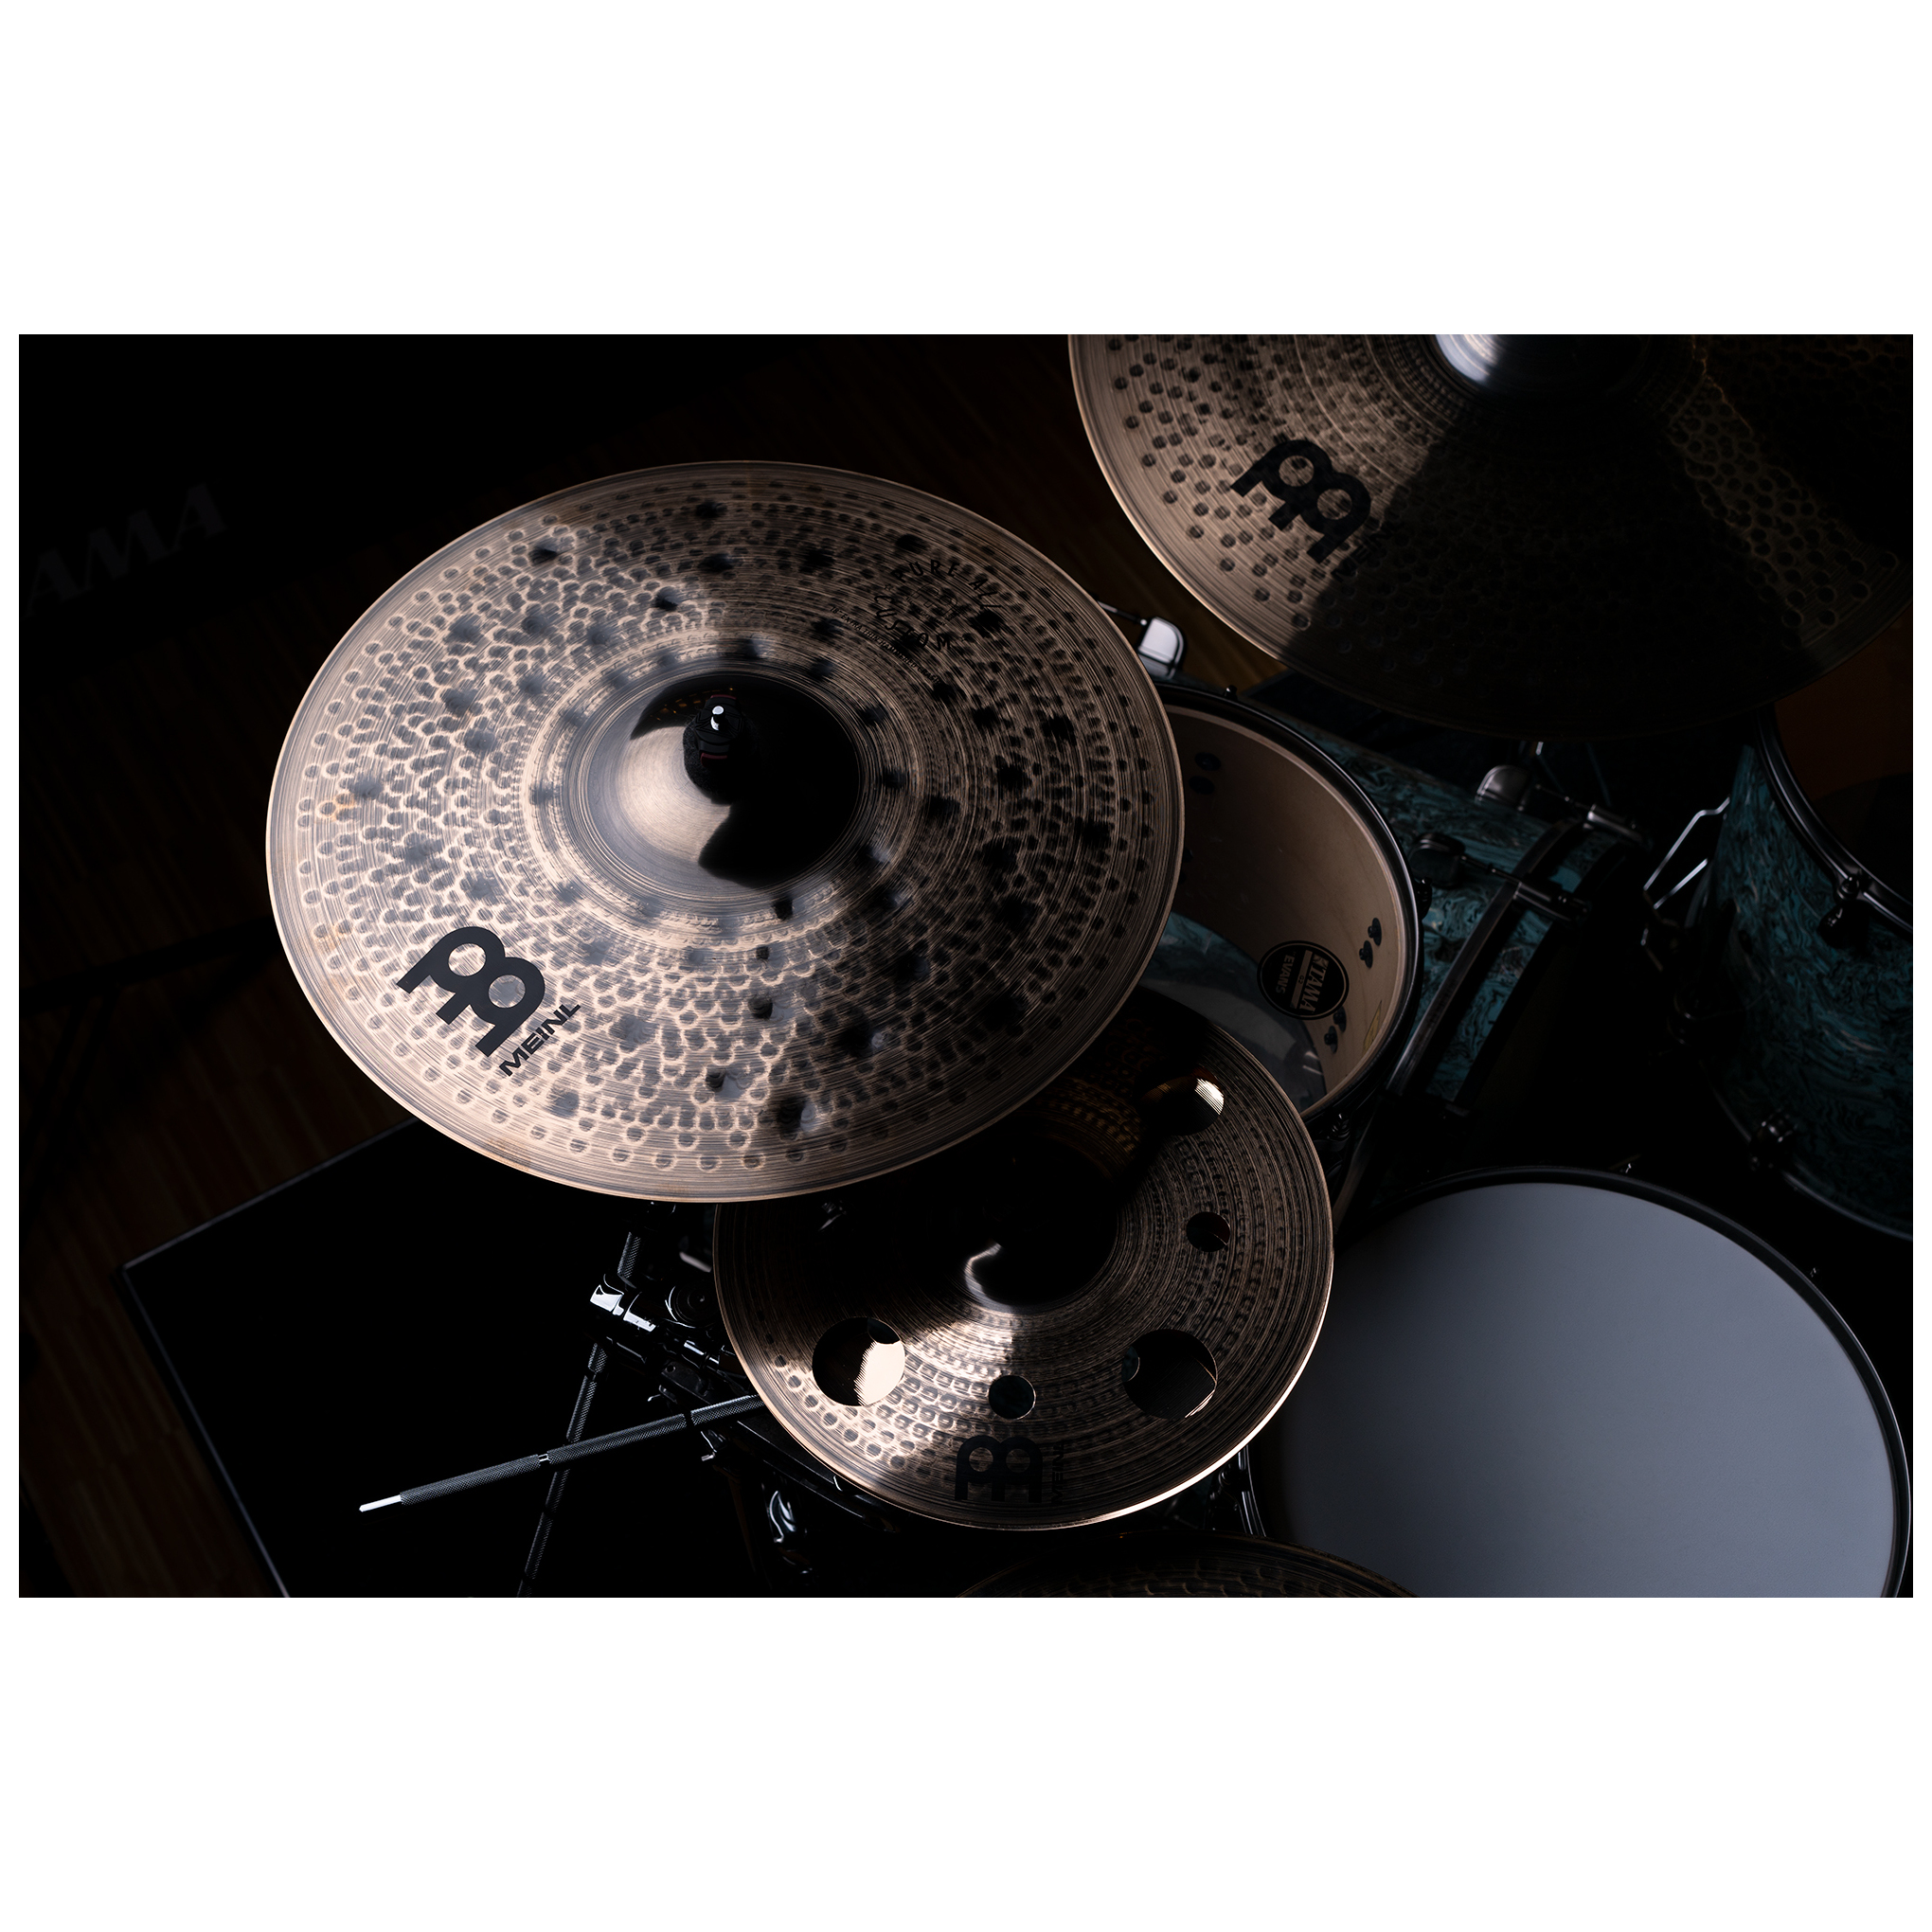 Meinl Cymbals PAC18ETHC - 18" Pure Alloy Custom Extra Thin Hammered Crash 8